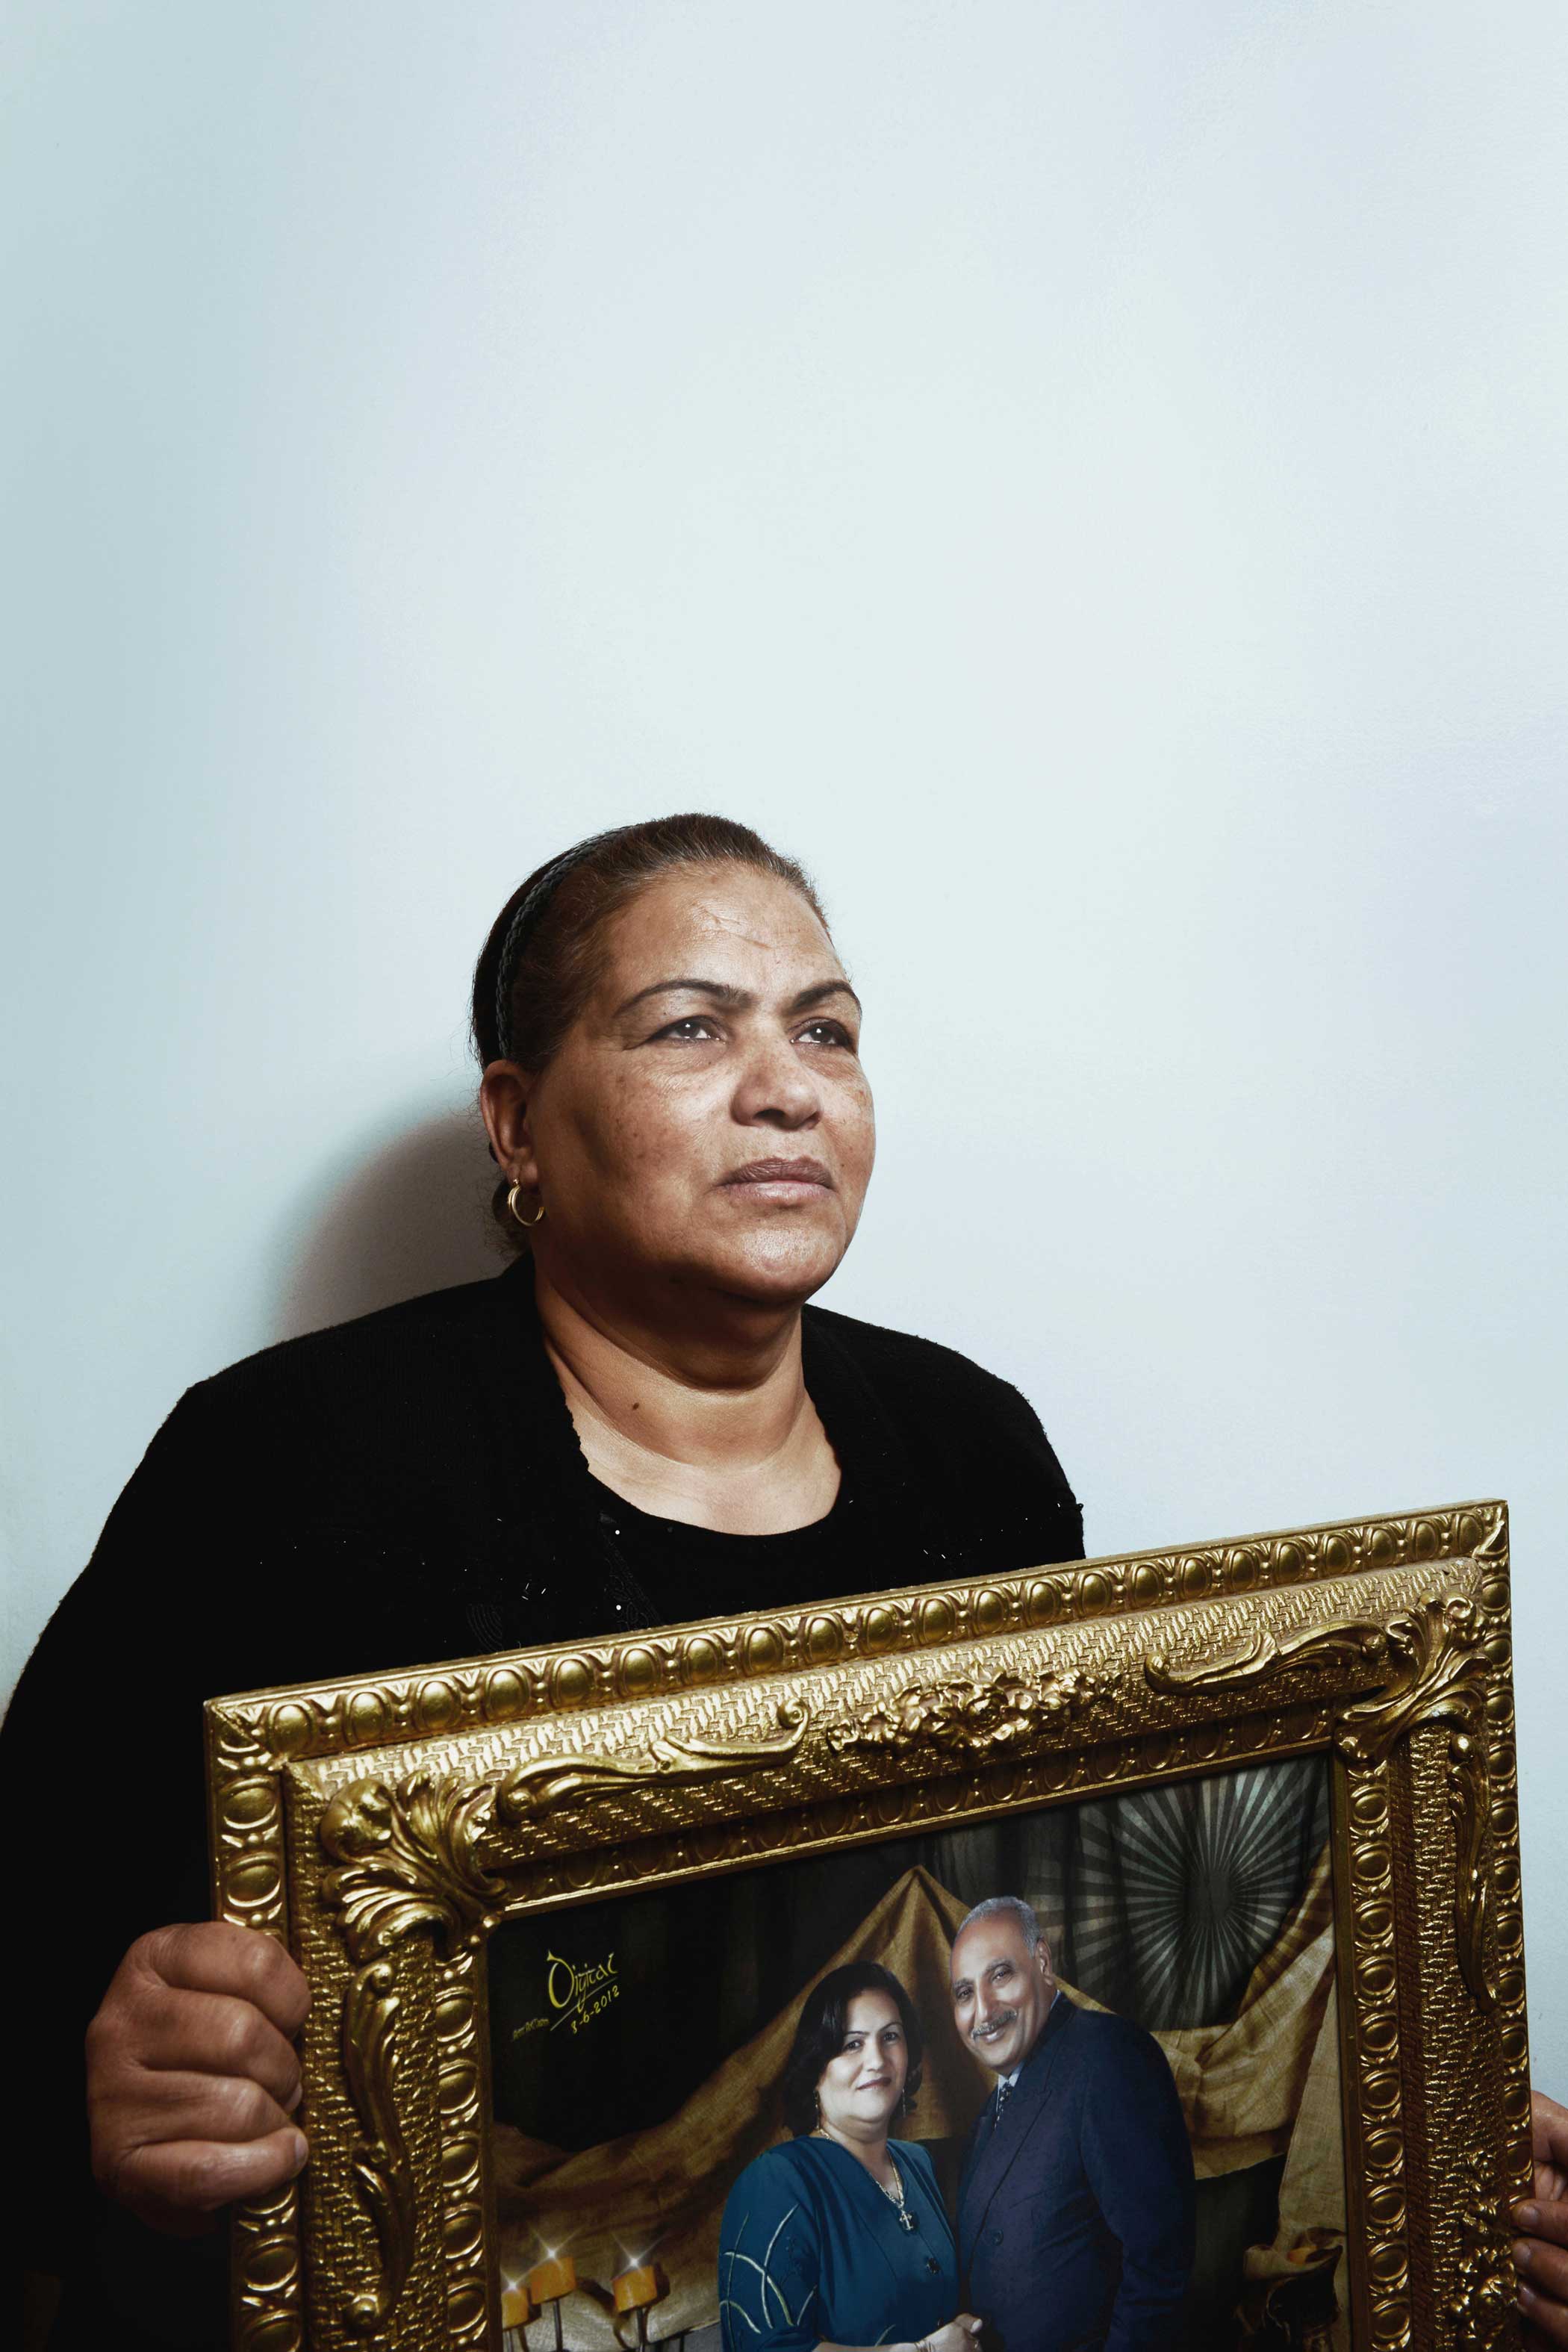 Enayat Shenouda, 62, holds a photo of her slain husband, Saad Zaki Badawi, 73. "Four months ago, after the recent Cairo Cathedral bombing, Saad told me he has wished he was one of the martyrs," Enayat said. "His wish came true yesterday. Now he is a martyr."